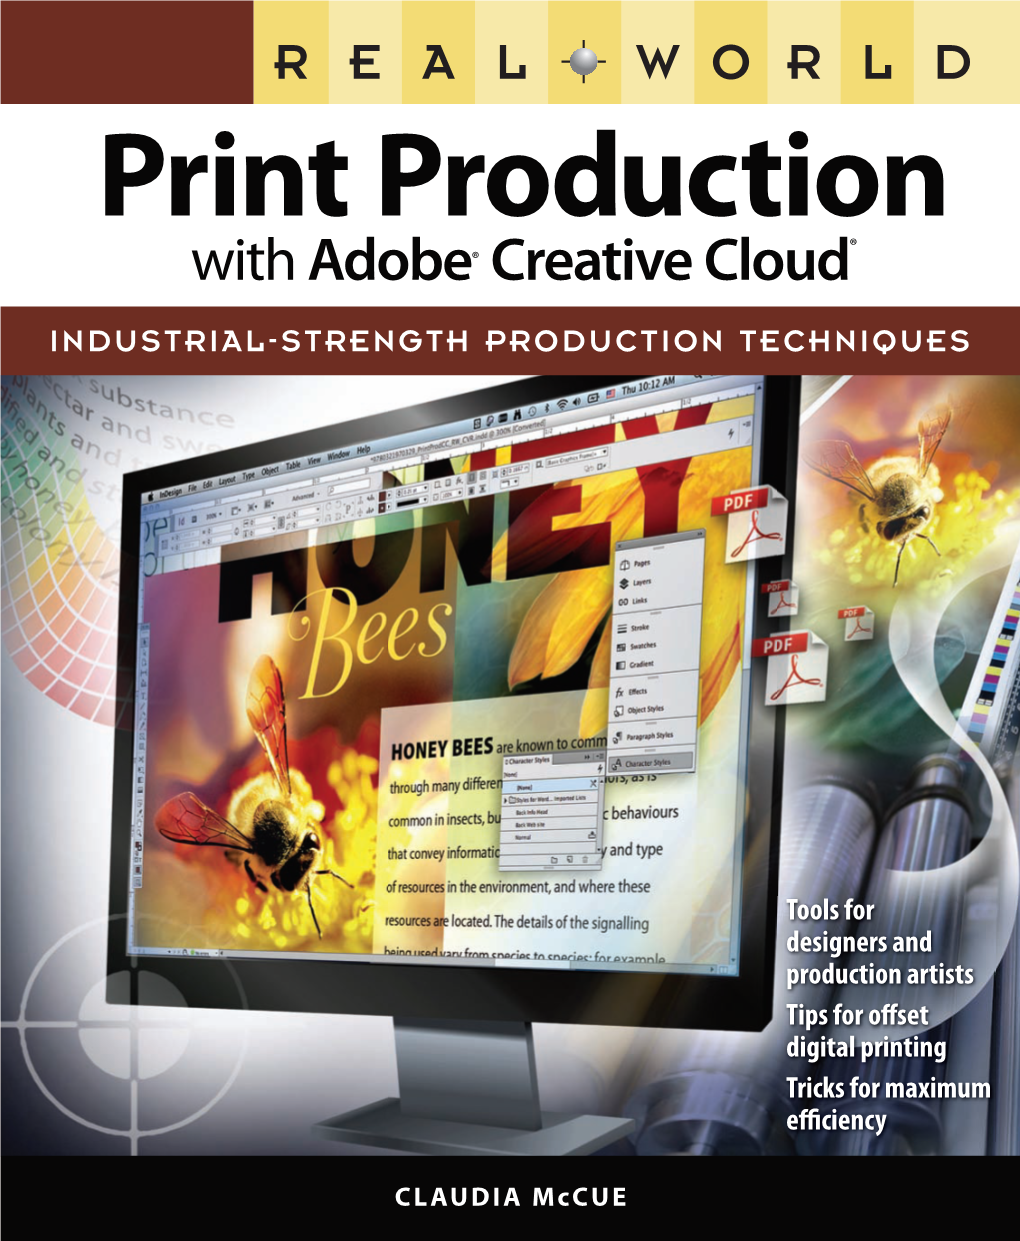 Real World Print Production with Adobe® Creative Cloud®